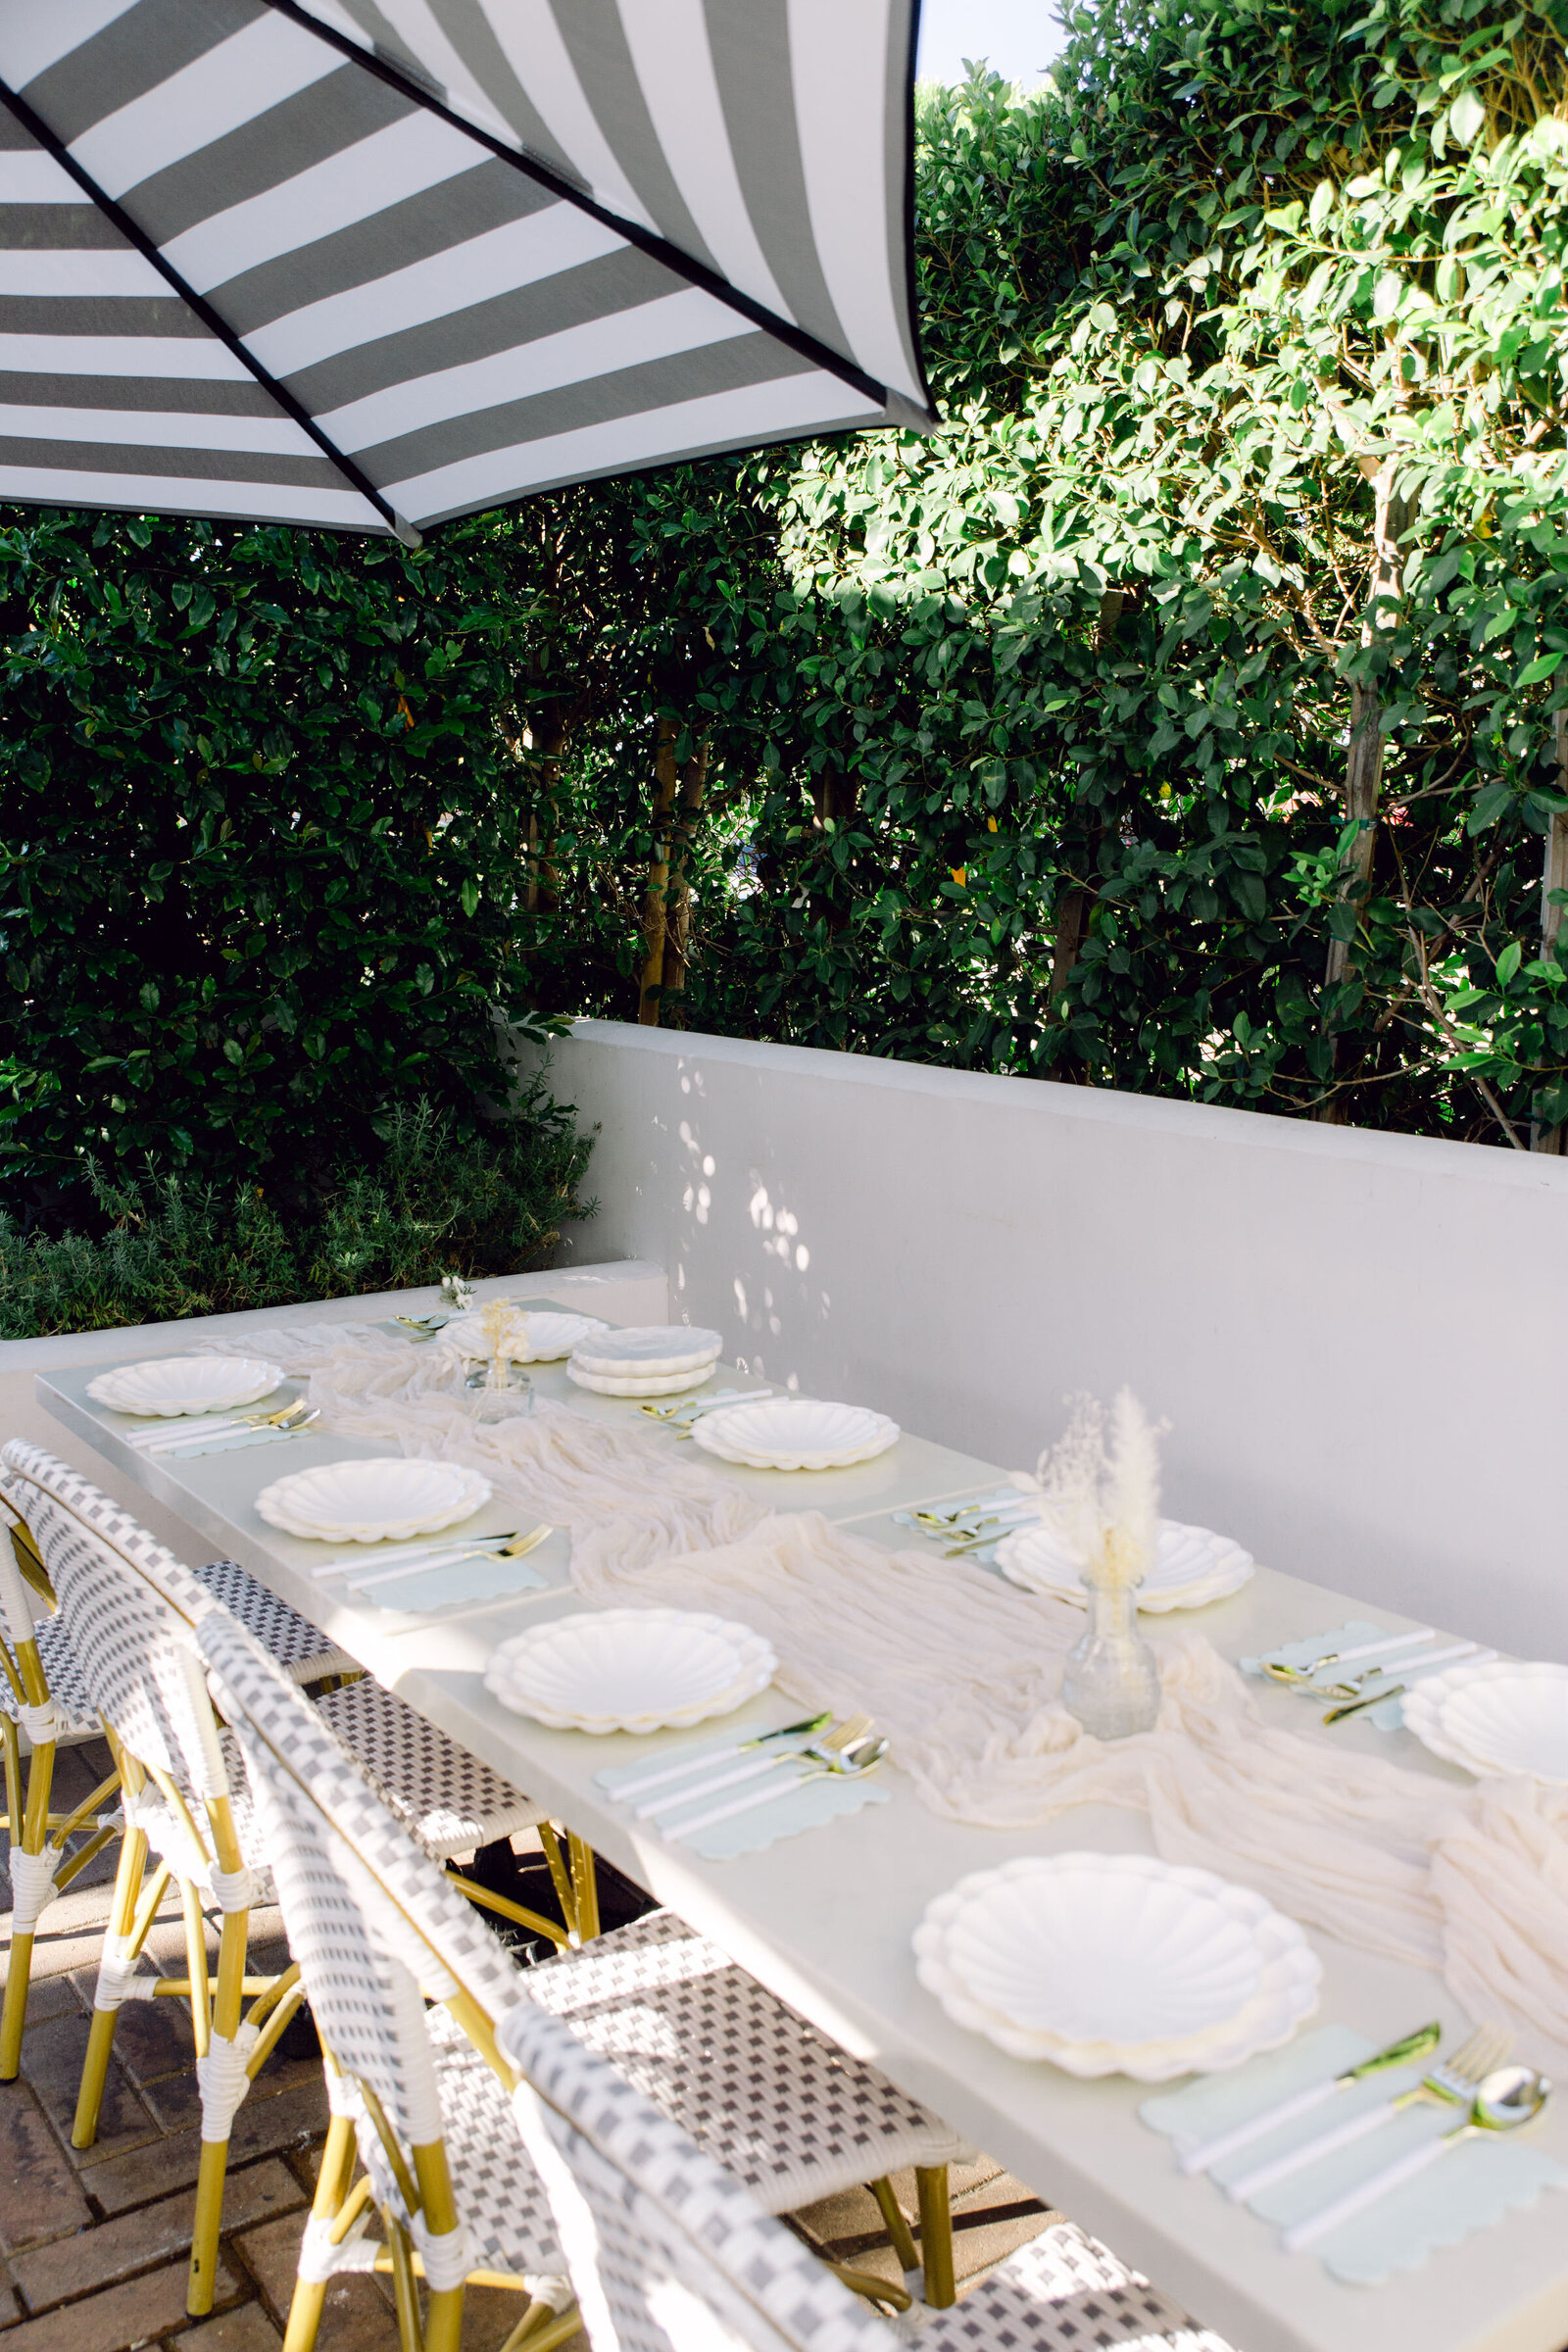 Morning Lavender baby shower event on the patio styled. Captured by branding photographer Chelsea Loren in Tustin, California.